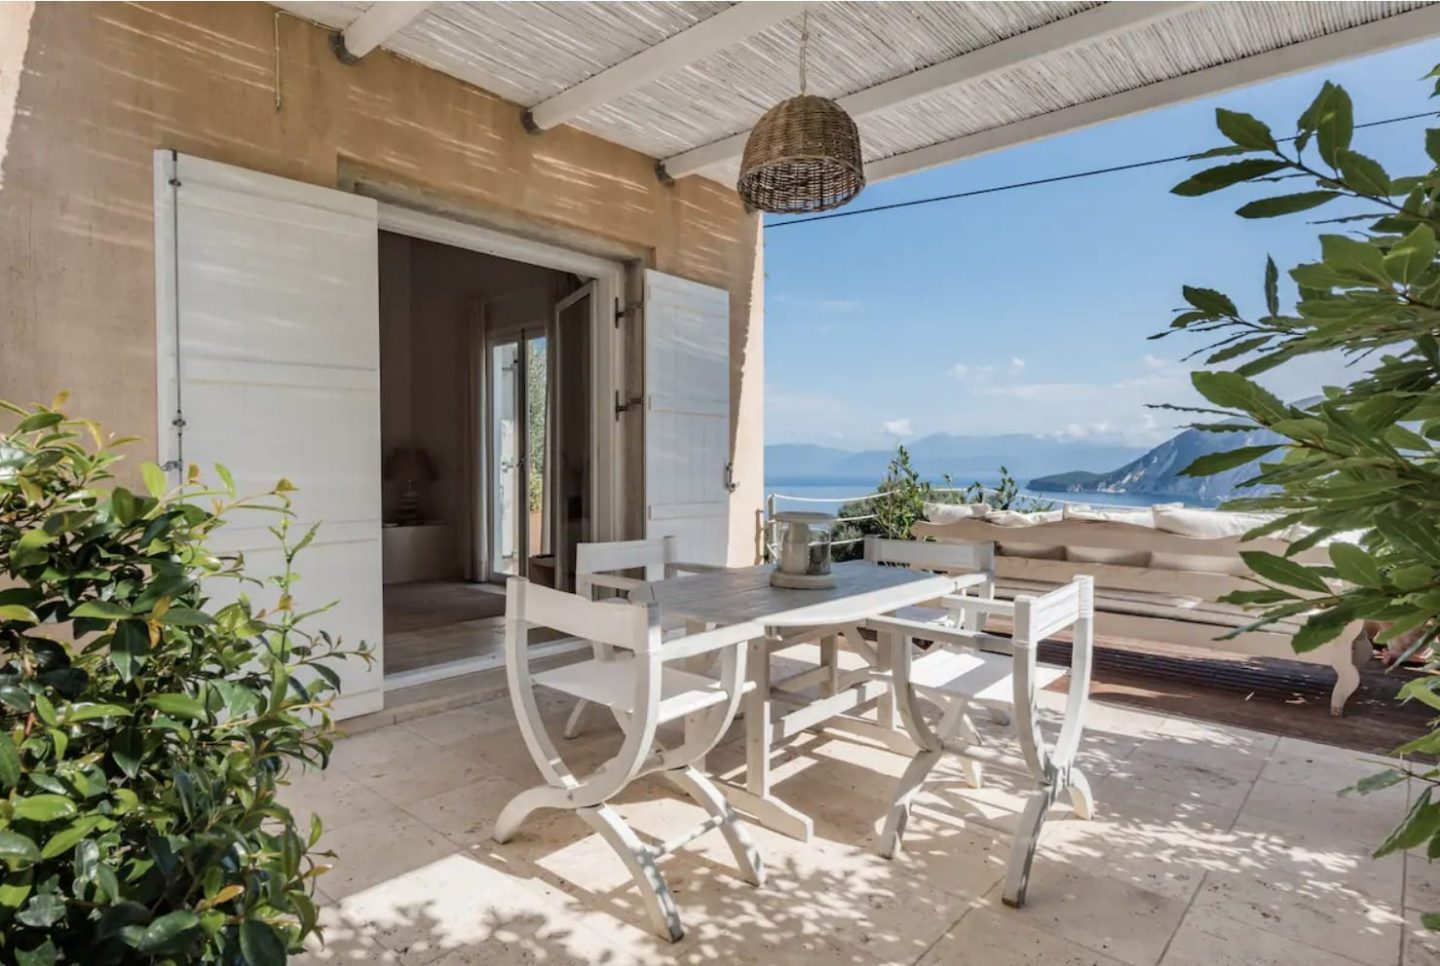 Outdoor paito overlooking a water view, dreamy Airbnb stays for under $100